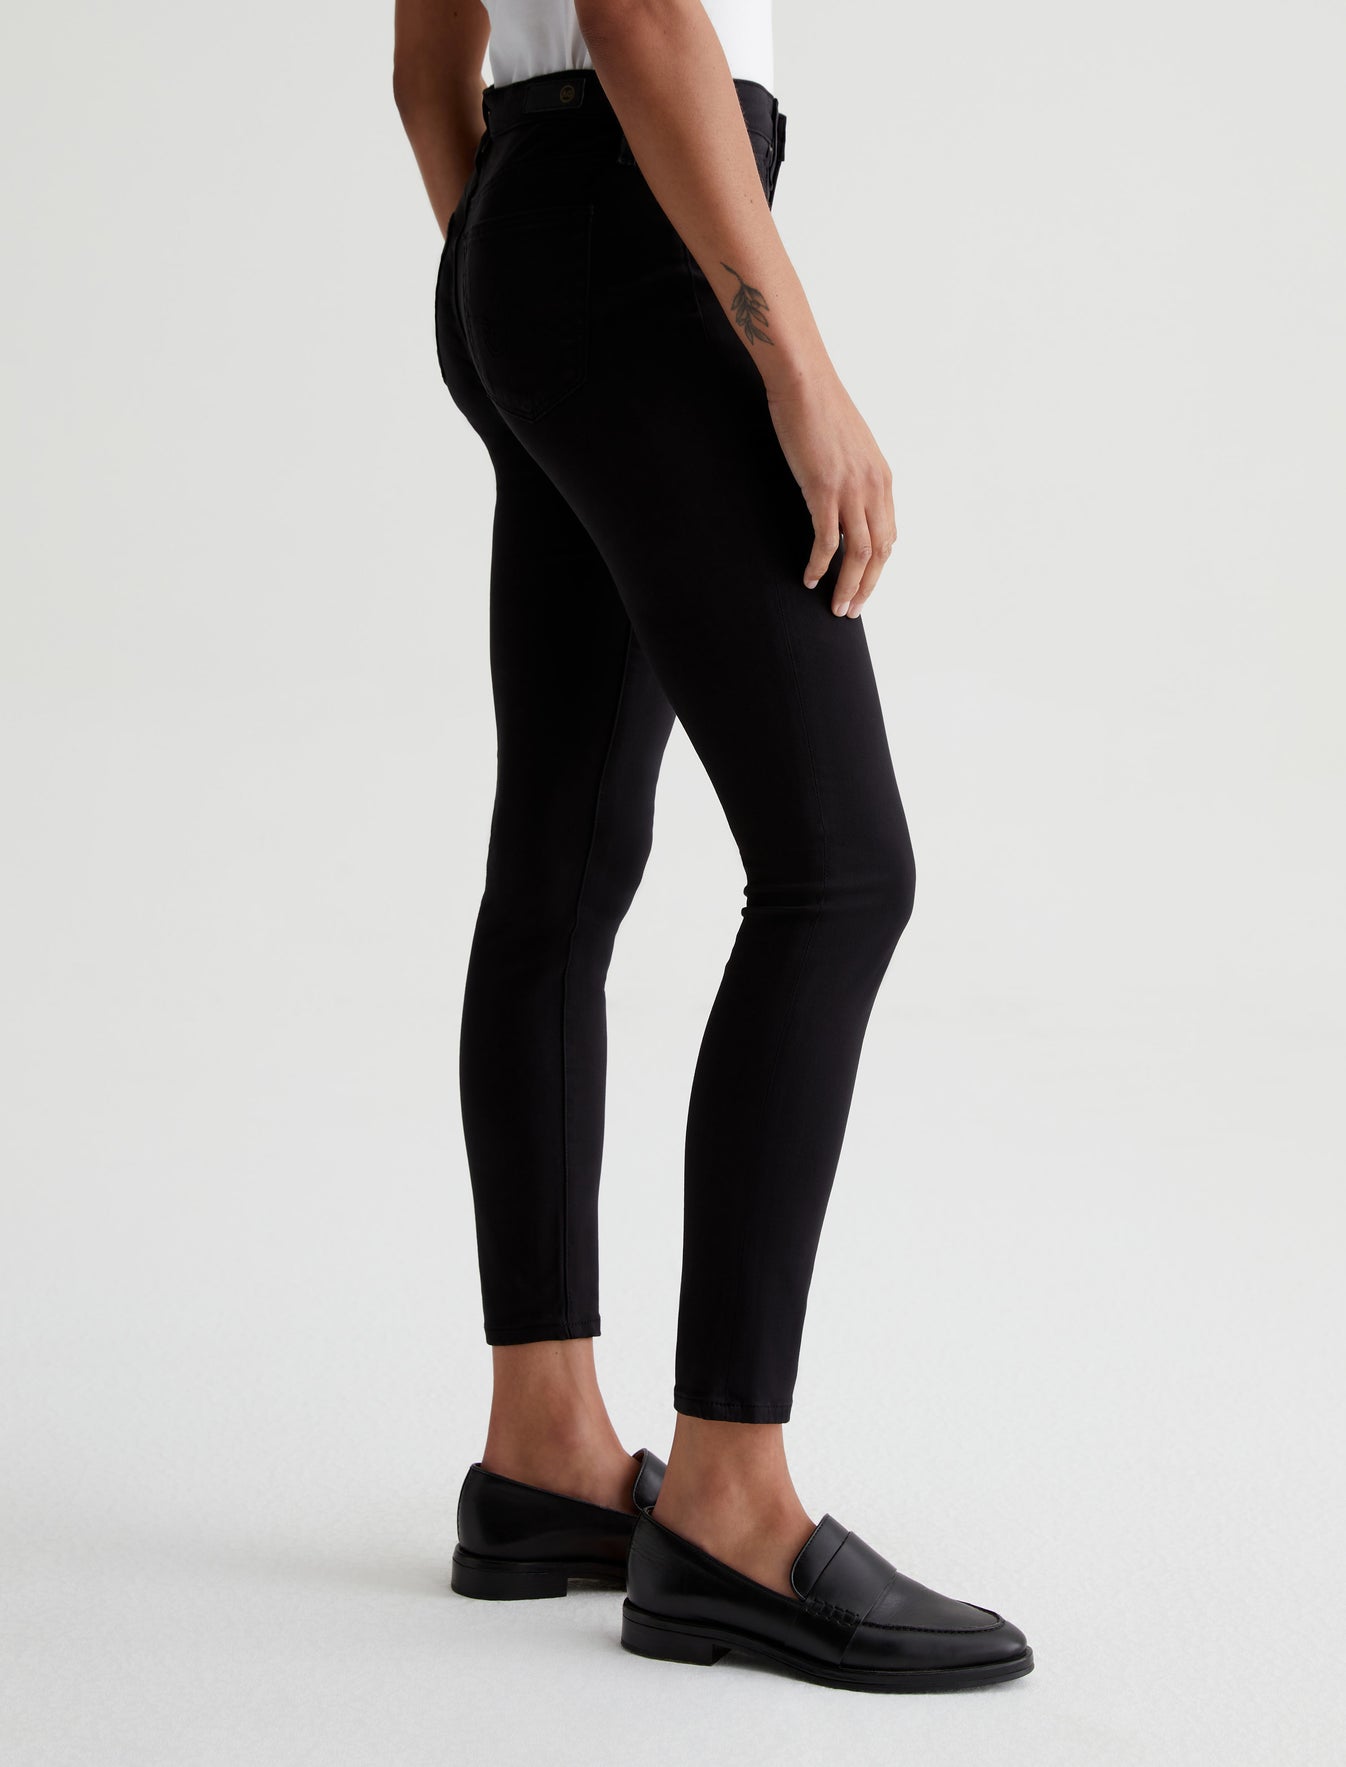 Womens Legging Ankle Super Black at Official Jeans AG Store